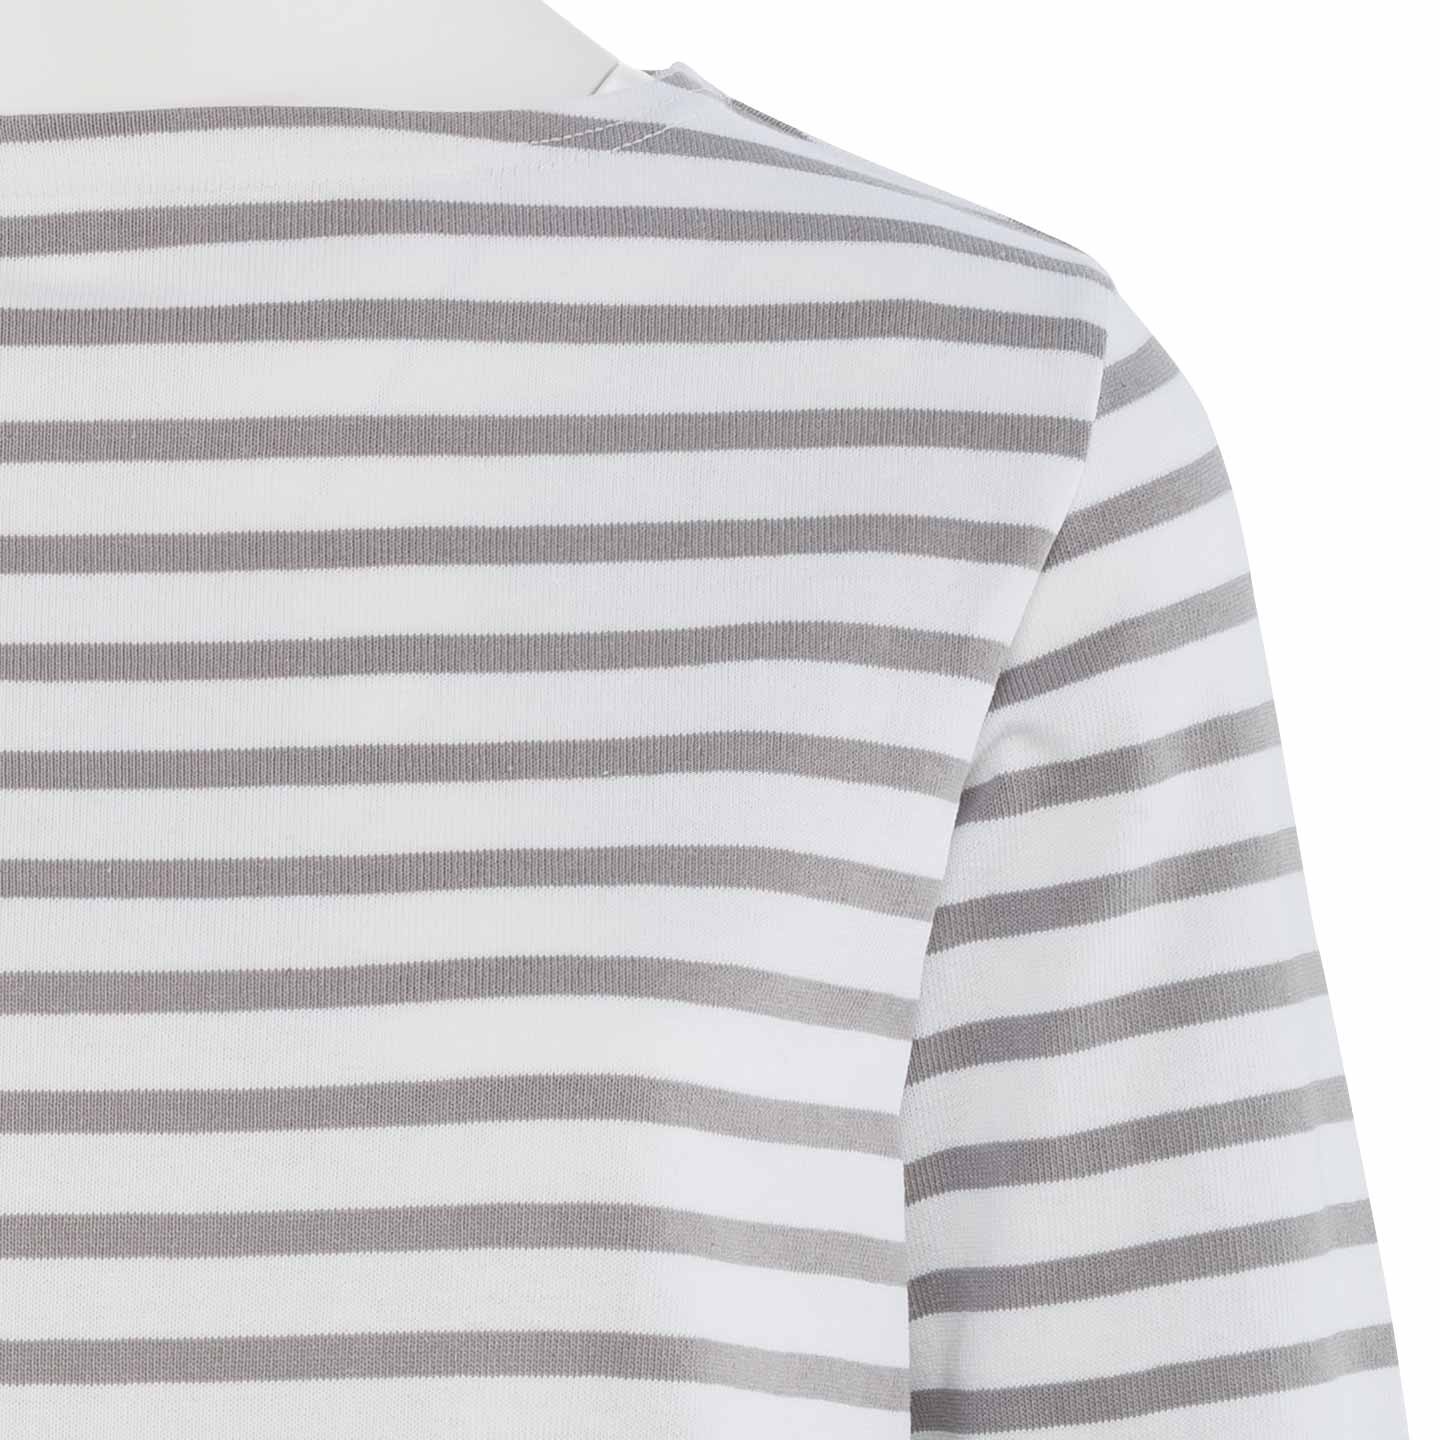 Striped shirt White / Cumulus, unisex made in france Orcival